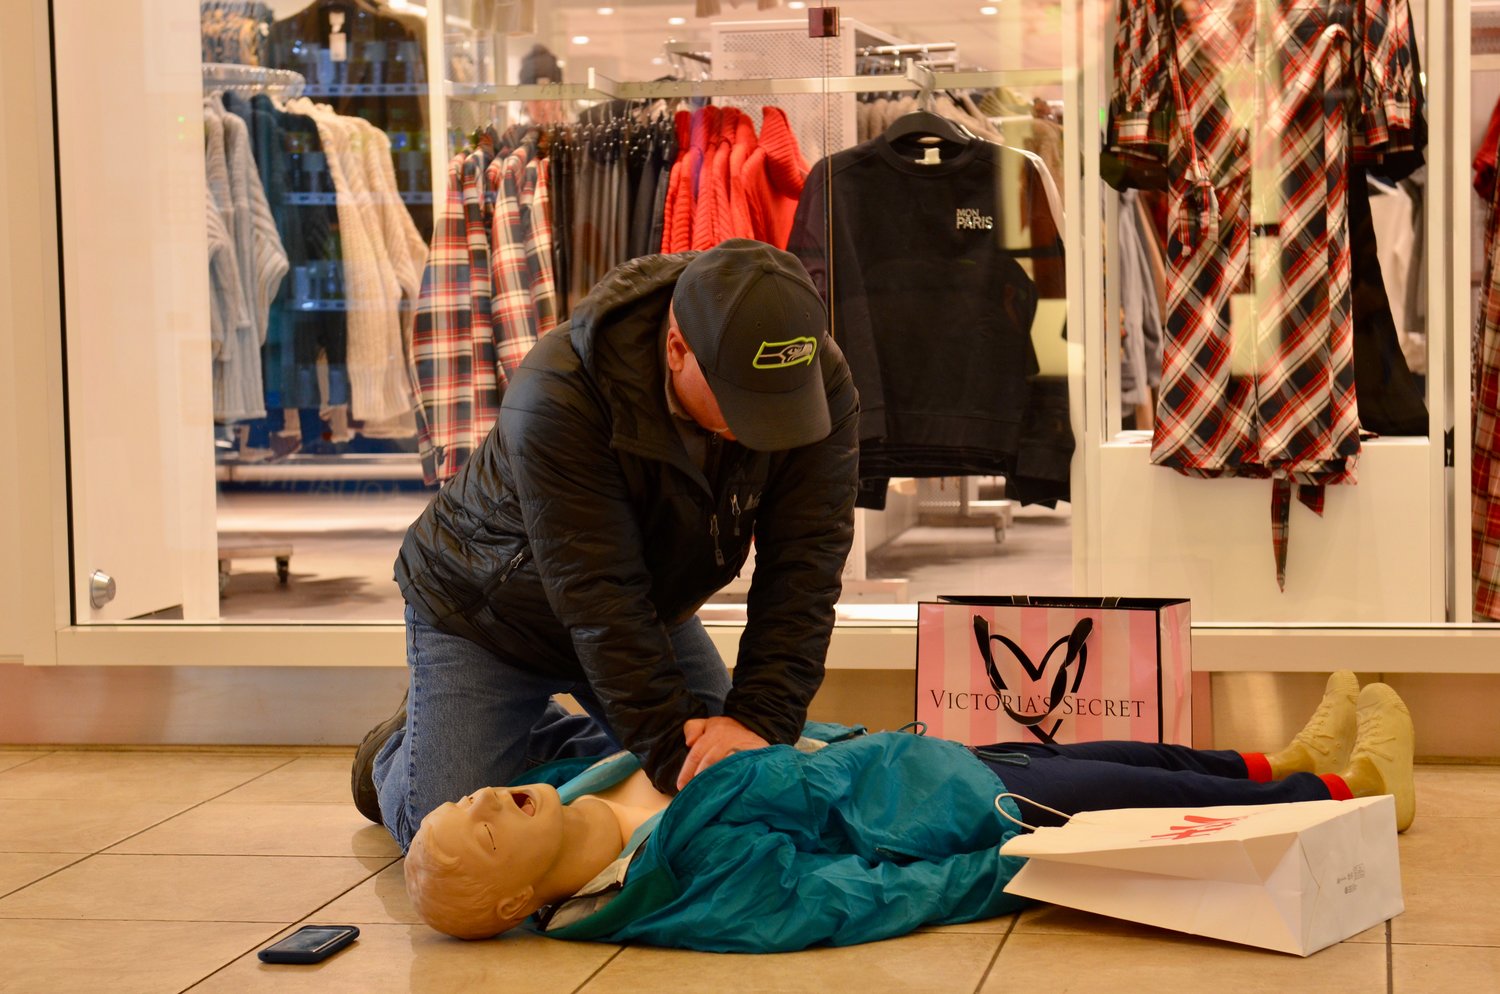 Thanks to a phone app, this dummy could be you receiving CPR from a volunteer first responder until medics arrive.